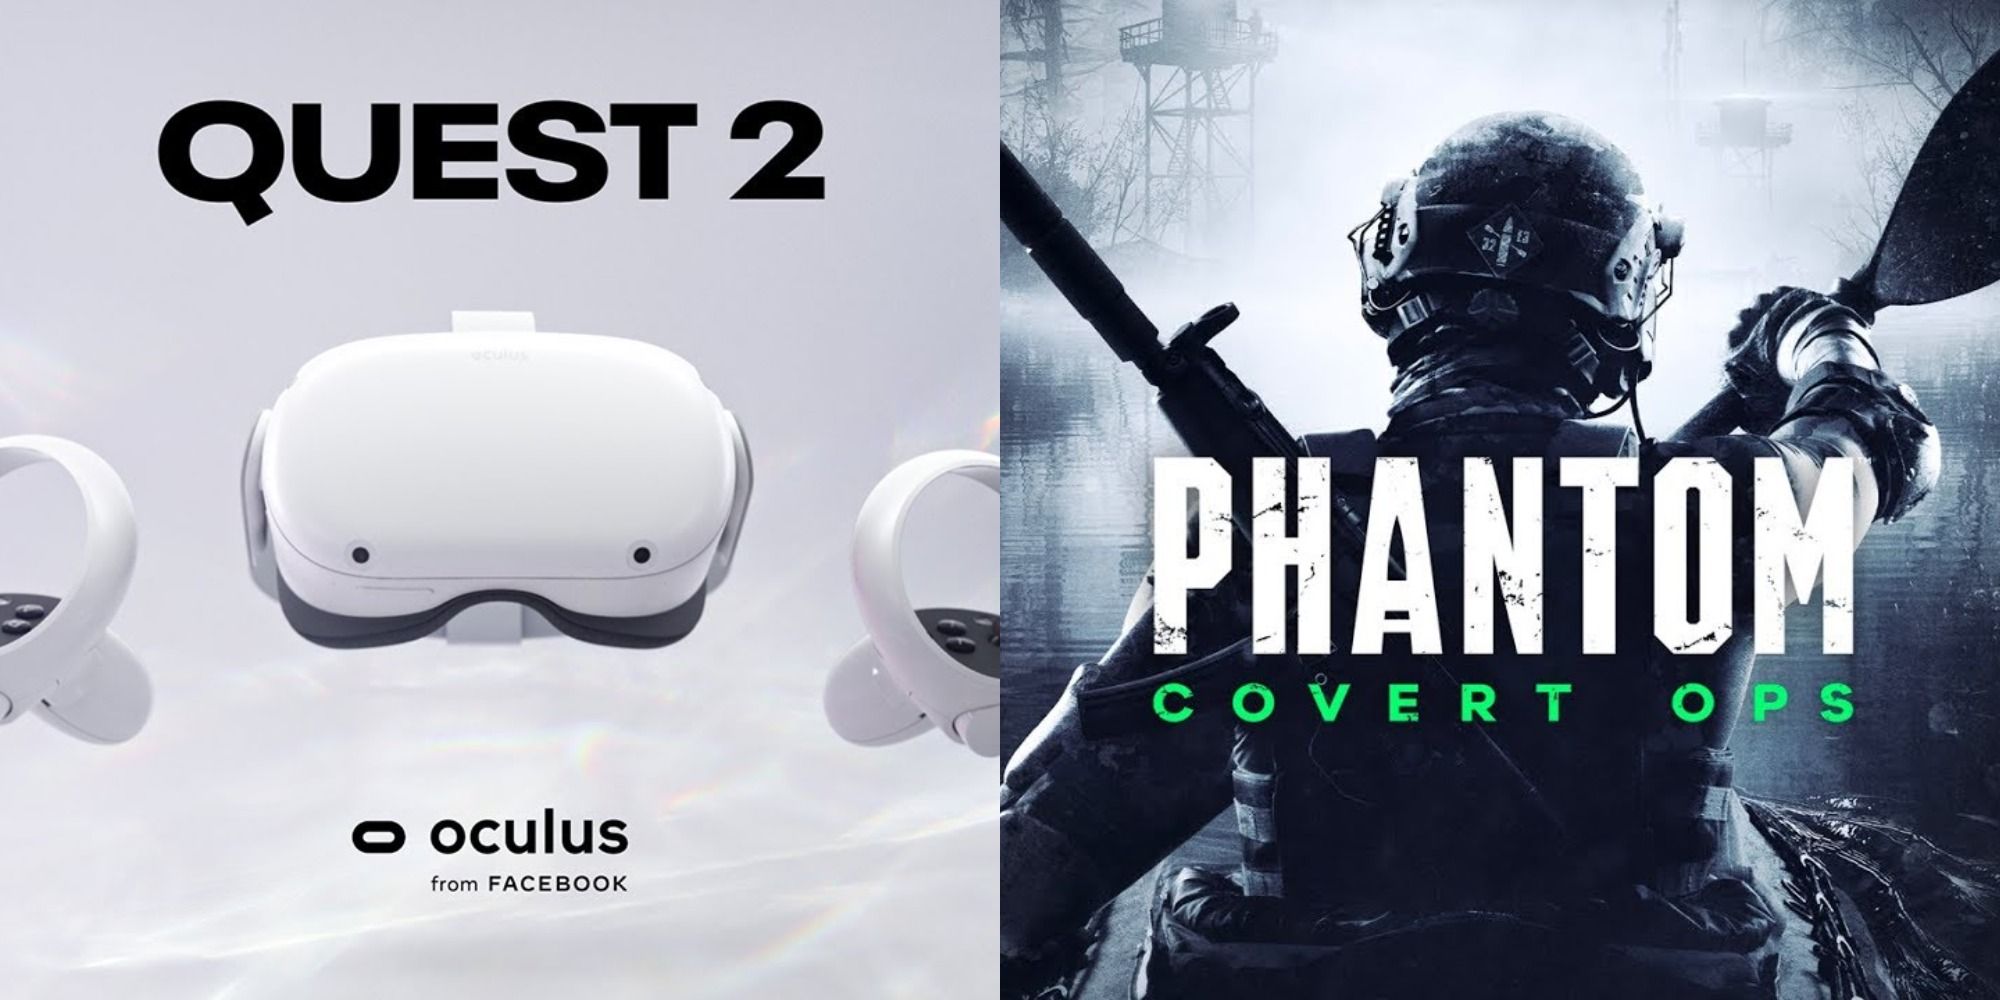 Split image showing an Oculus Quest 2 and the cover for Phantom Covert Ops.